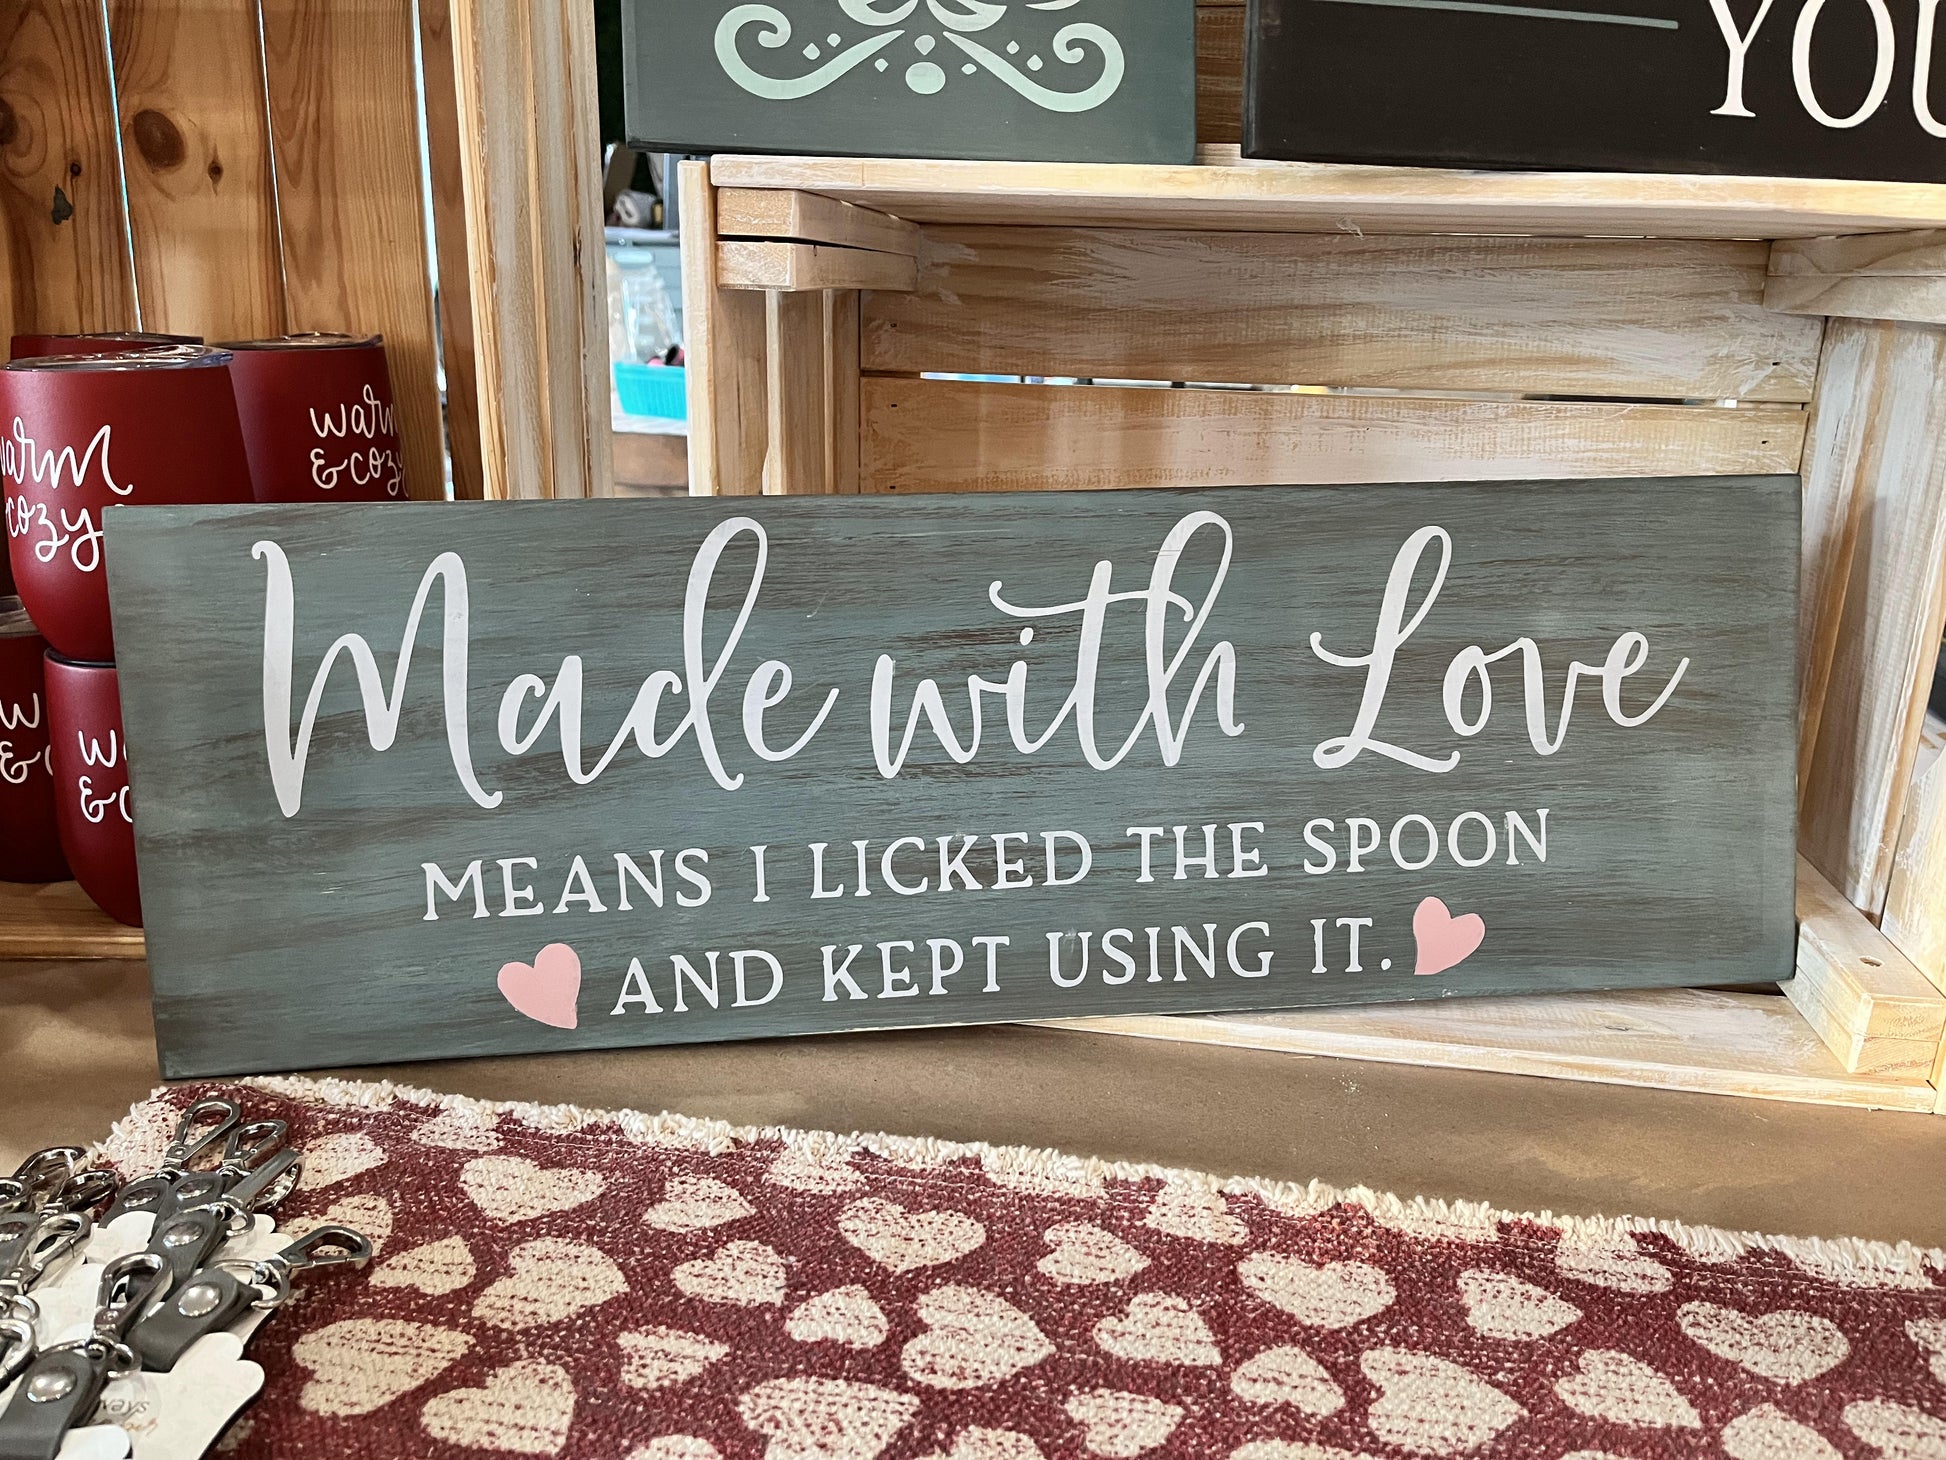 Made With Love Means I Licked The Spoon And Kept Using It: Plank Design - Paisley Grace Makery